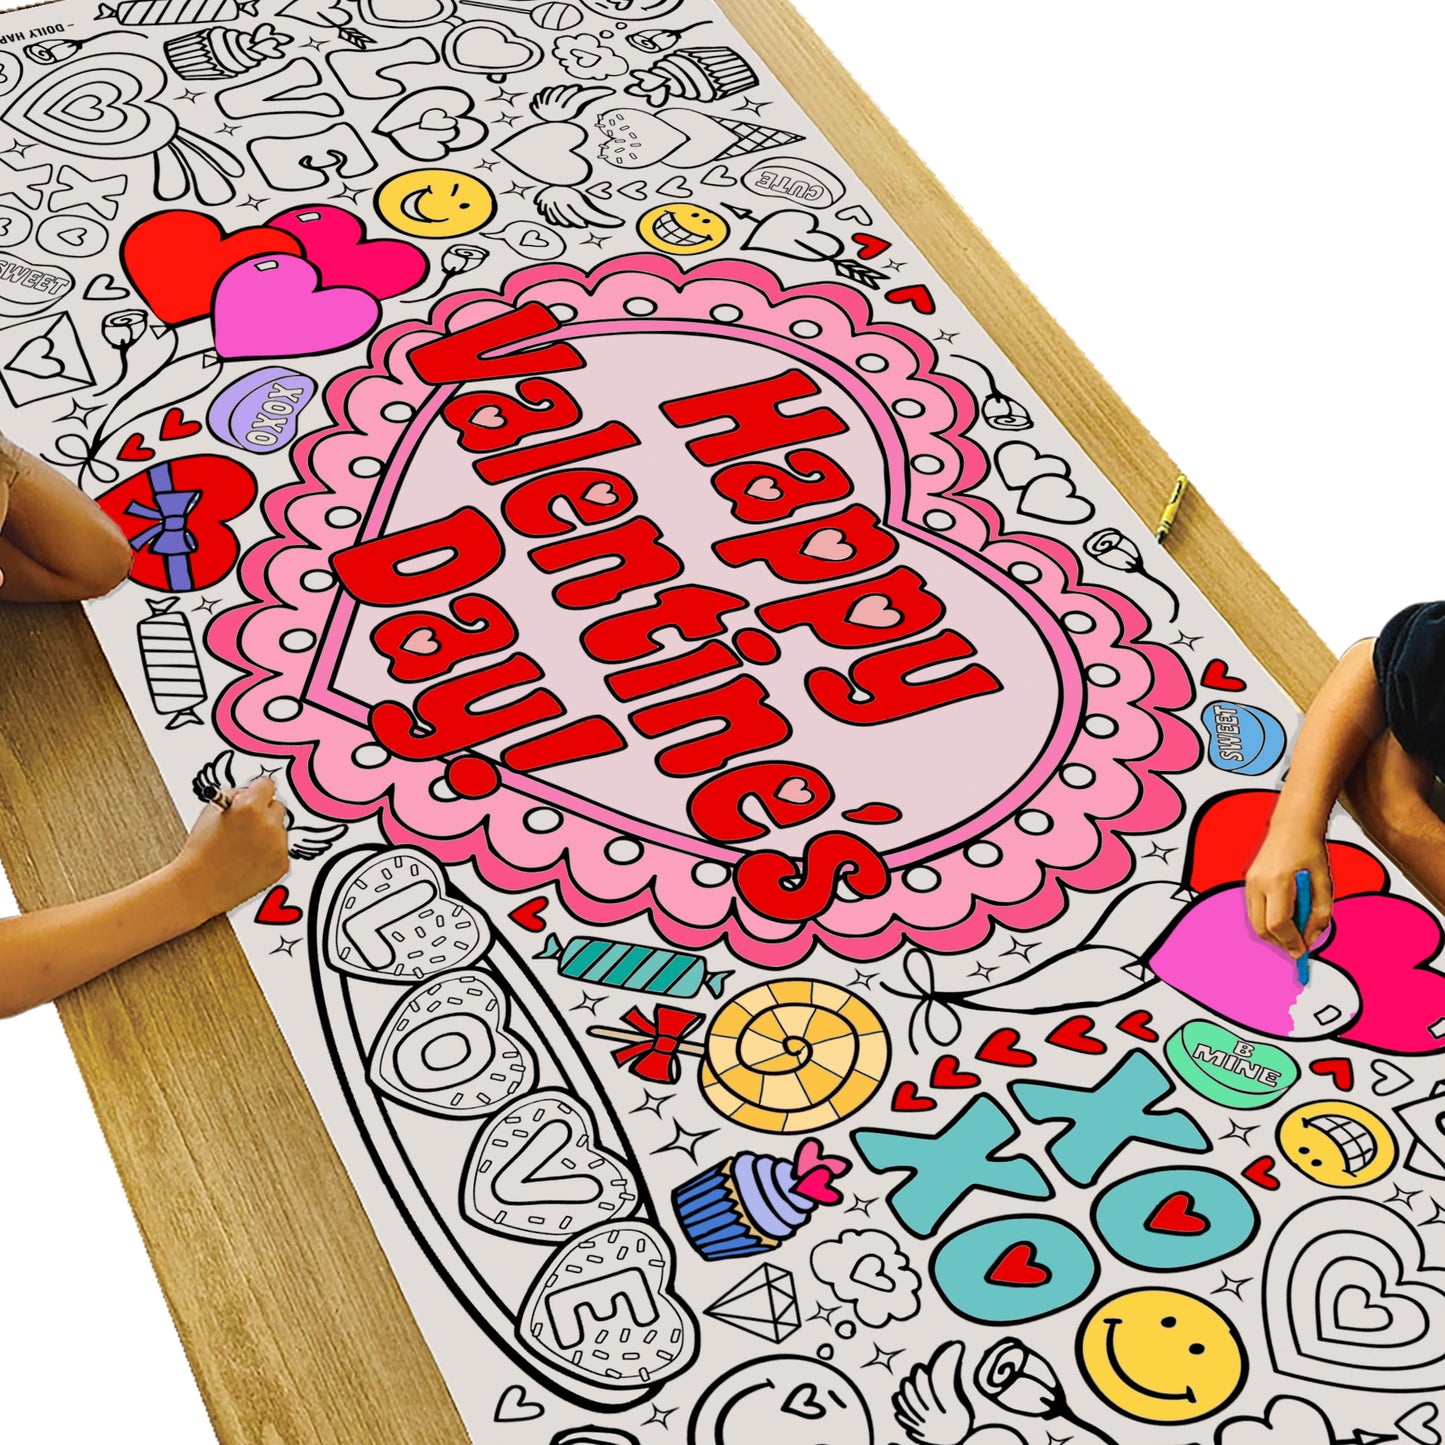 Giant Valentine's Day Hugs & Kisses Coloring Banner